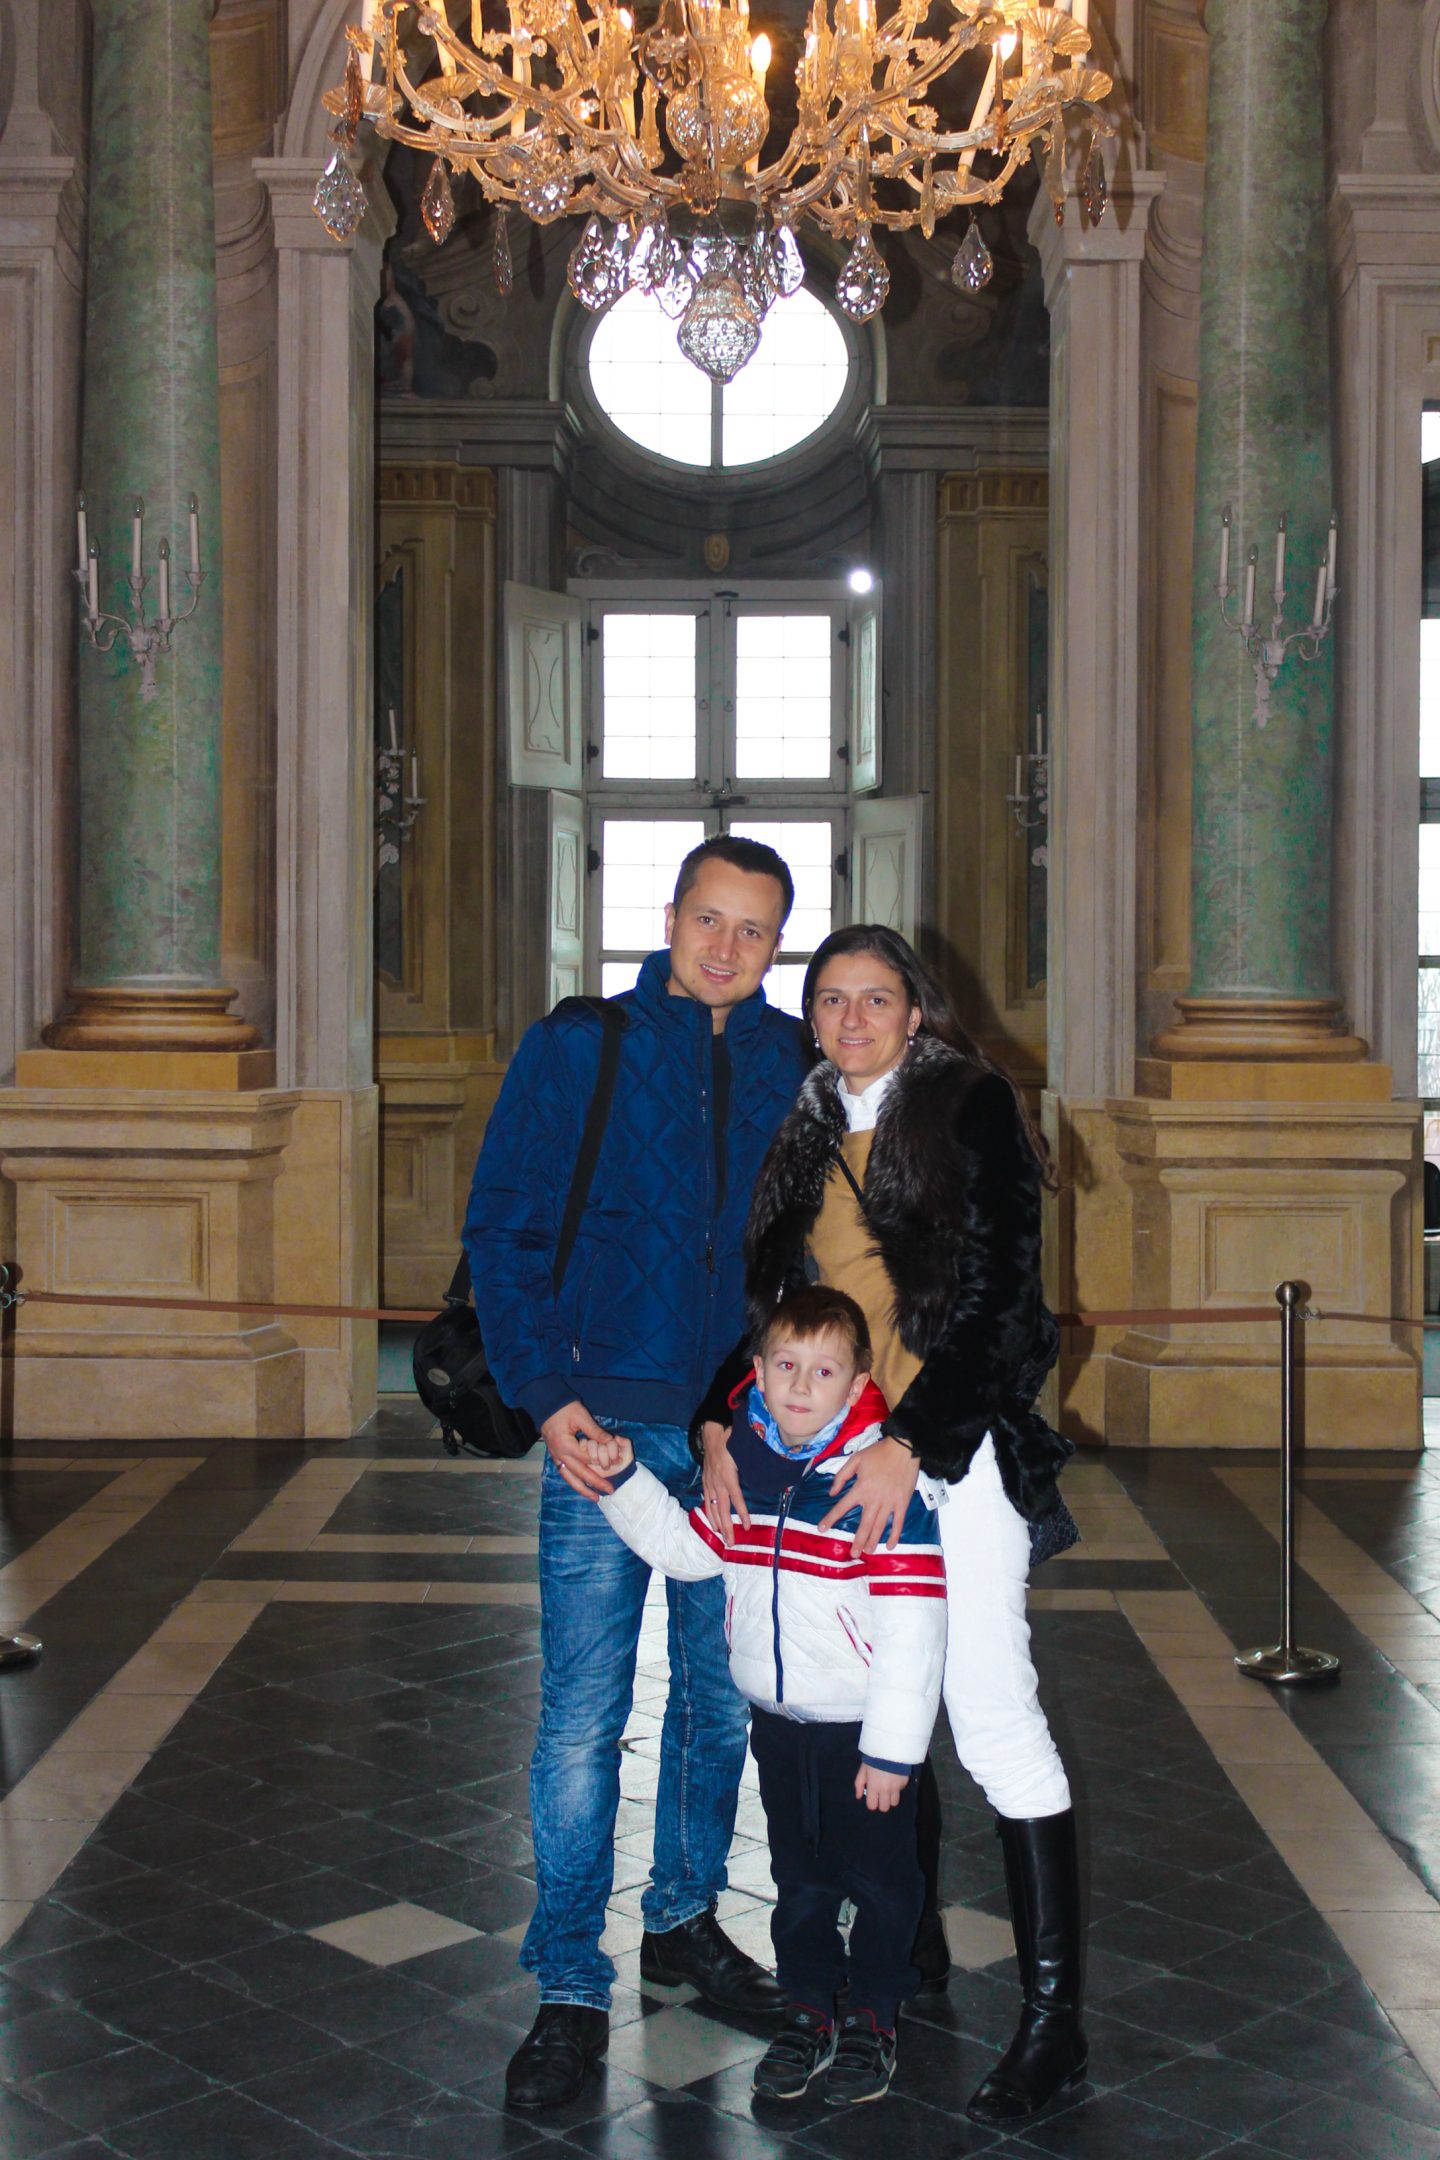 Discovering Italy, Turin with 2 kids. - Travel Family Blog1440 x 2160